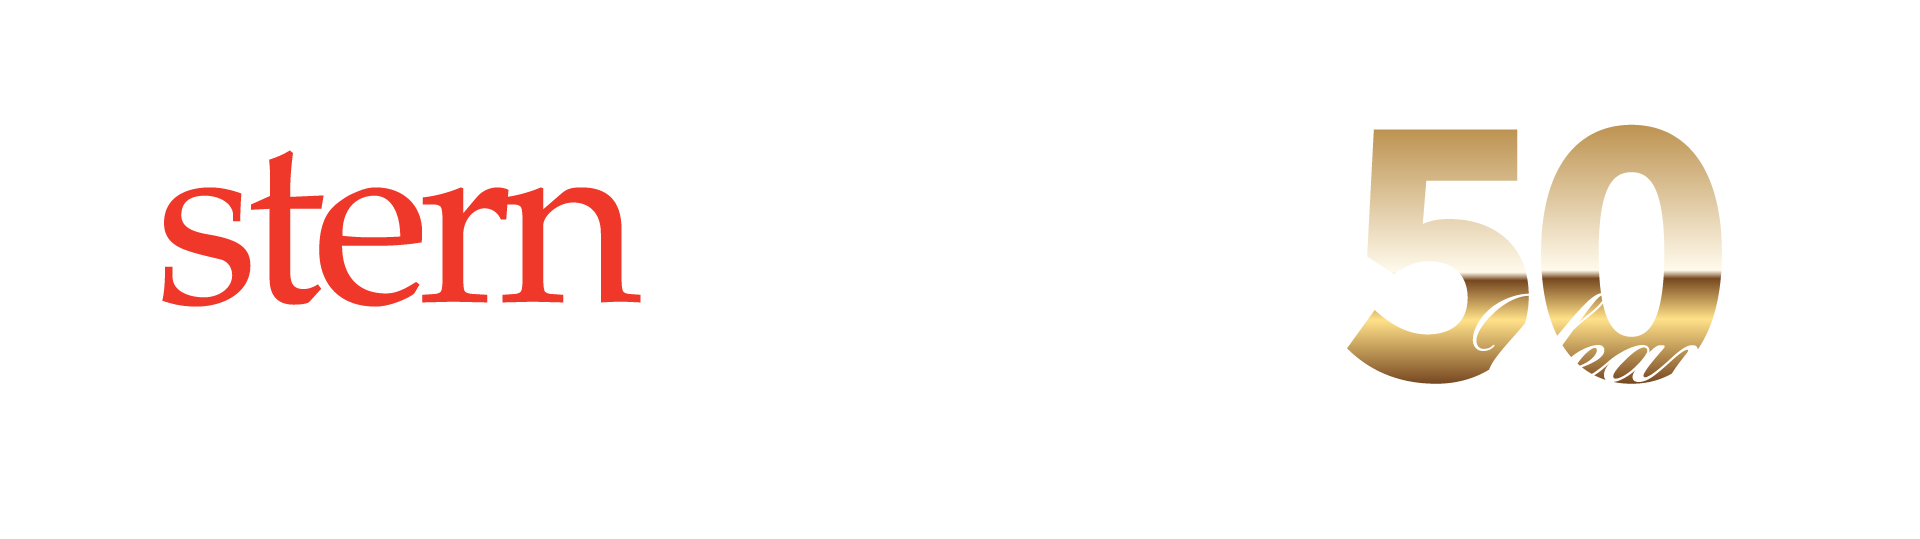 50 years of Sternfenster